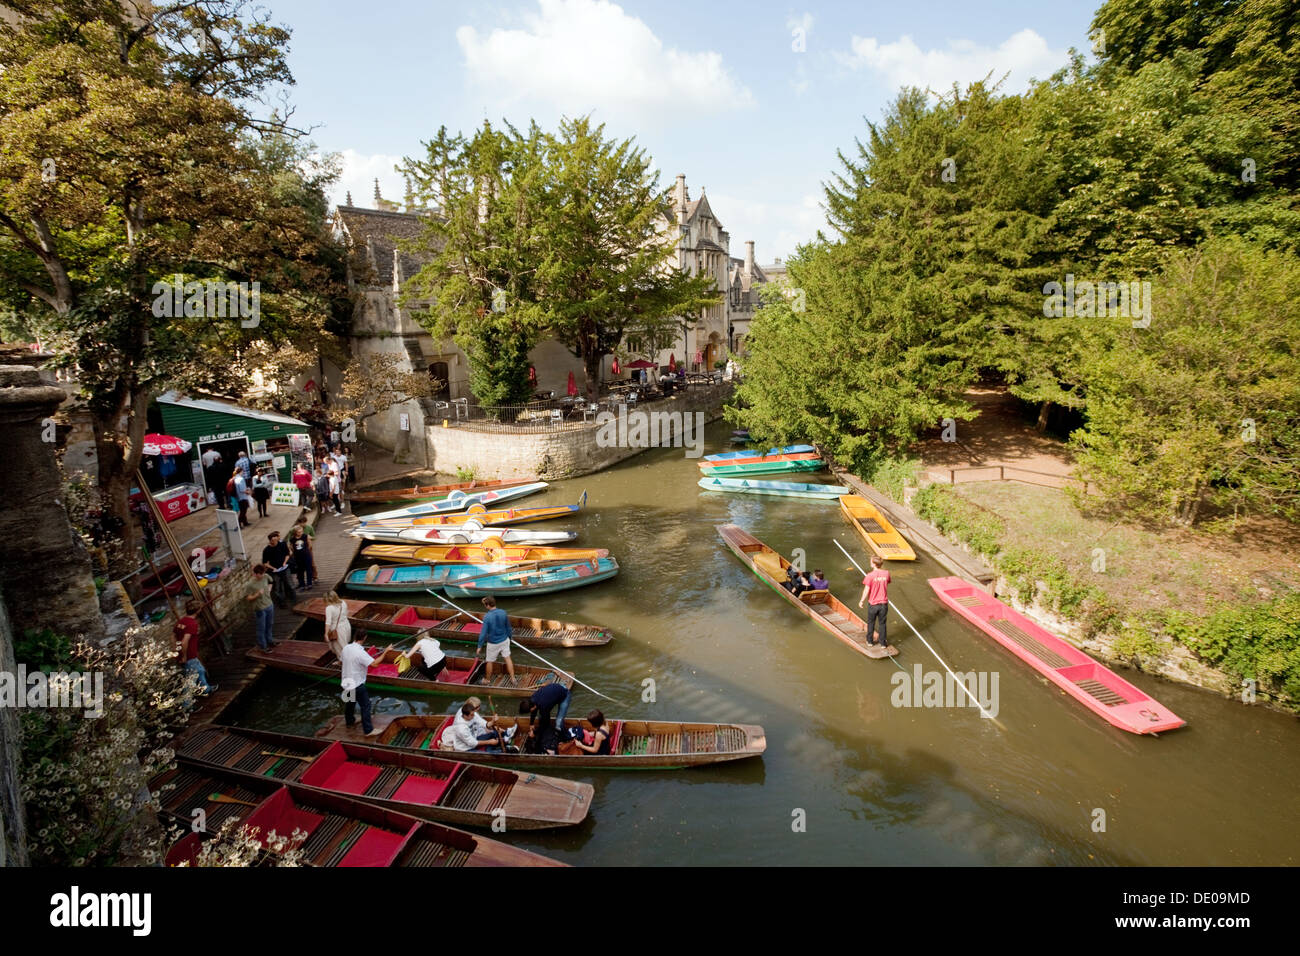 Oxford punting - punts for hire in summer at Magdalen Bridge, Oxford, UK Stock Photo